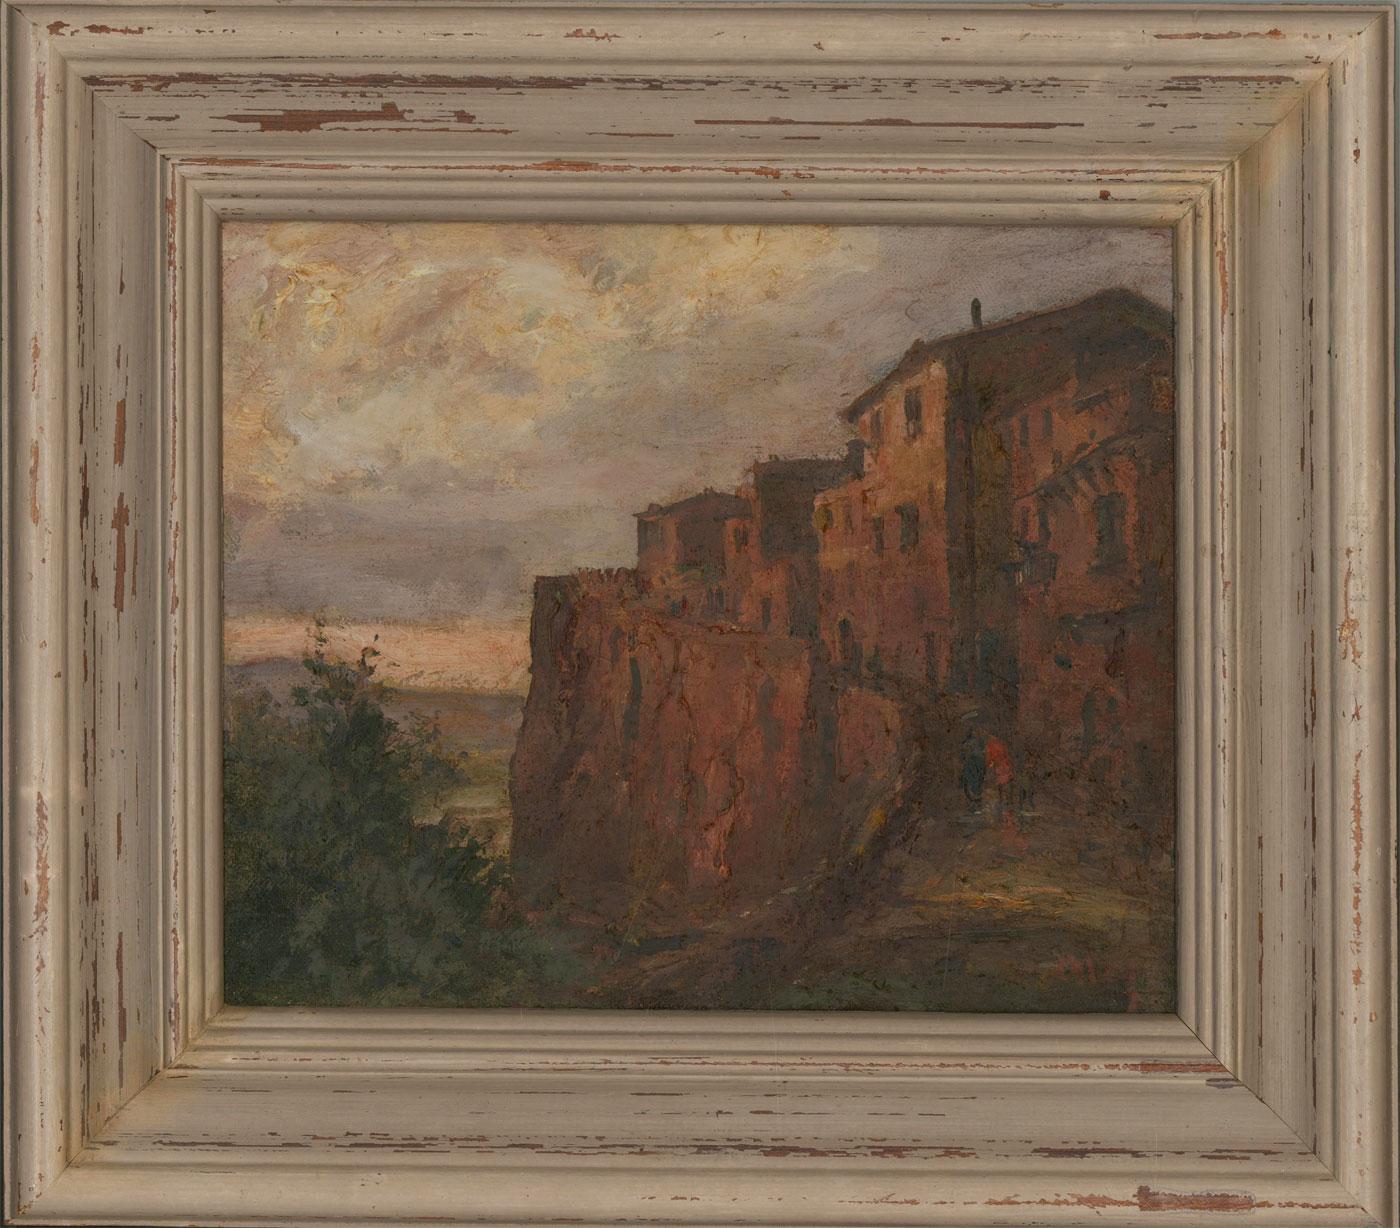 A well executed oil painting with areas of impasto by the listed artist Ronald Olley, depicting the distinctive view of a Tuscan hill town, with figures making an ascent up the hill. It has been signed t the lower right and is well represented in a